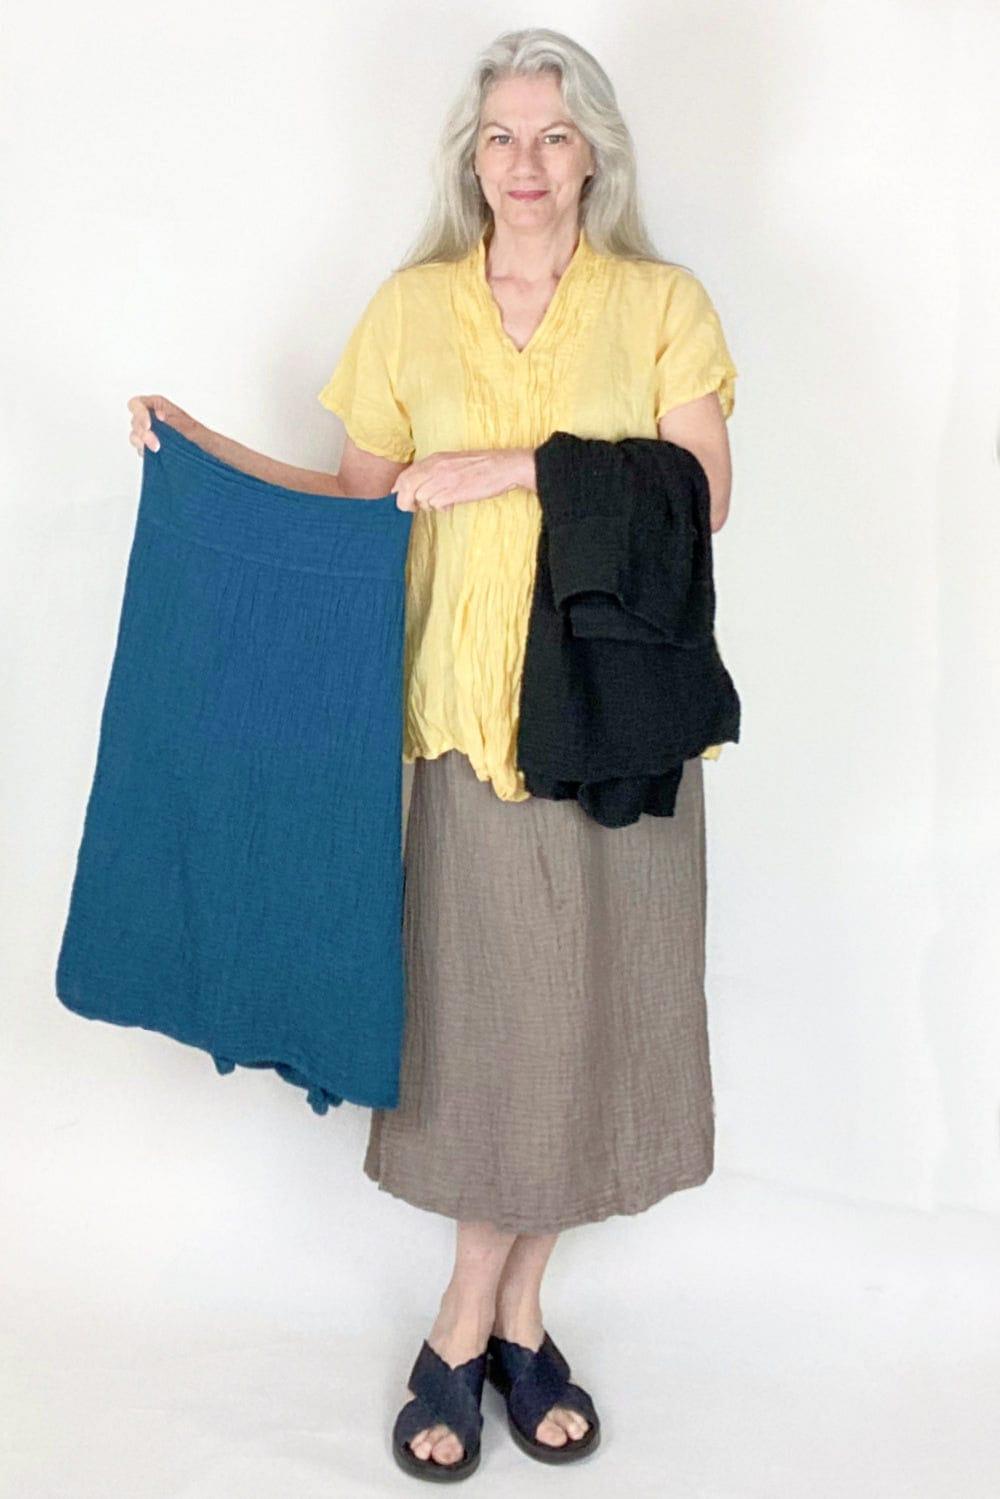 Woman with long grey hair wearing a yellow cotton short sleeve cotton blouse with a beige cotton skirt. She is holding a blue  skirt in her hands and has a black skirt draped over her arm.